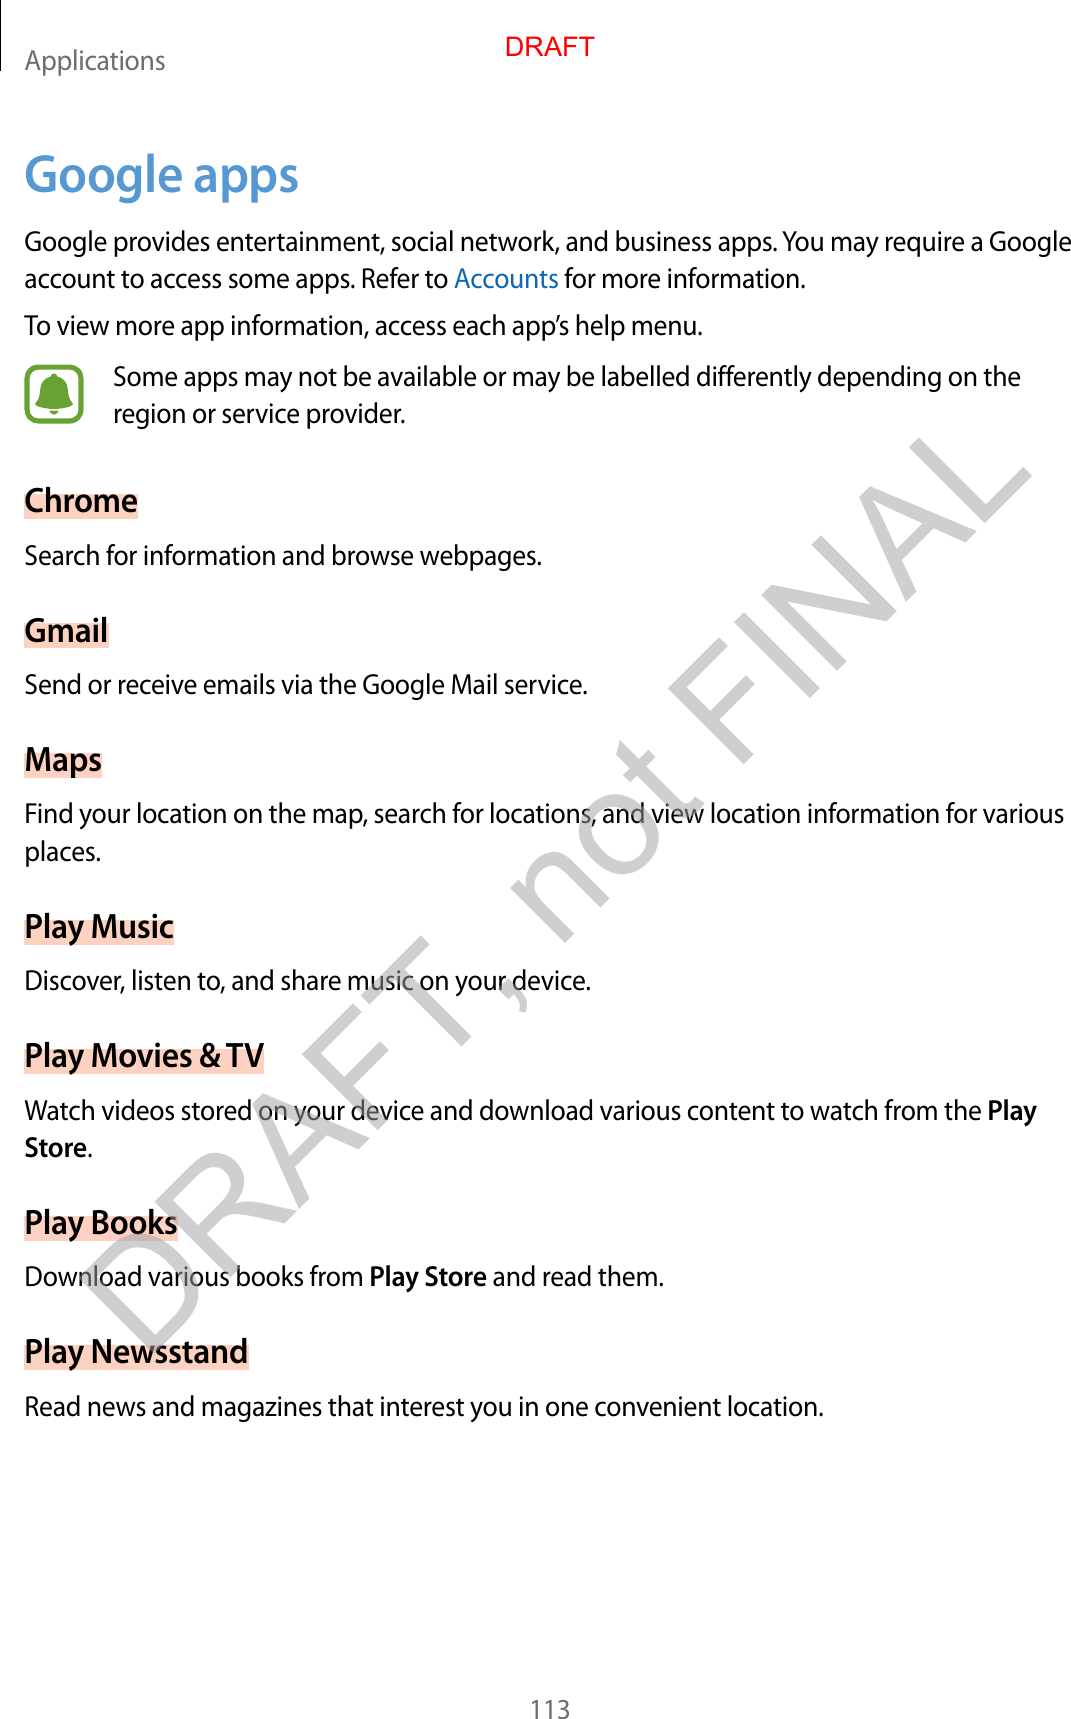 Applications113Google appsGoogle provides ent ertainment, social network, and business apps. You may requir e a Google account t o ac cess some apps . Ref er t o Accounts for mor e inf ormation.To view more app inf ormation, ac cess each app’s help menu.Some apps may not be available or ma y be labelled diff er en tly depending on the region or service provider.ChromeSearch for information and browse w ebpages .GmailSend or receiv e emails via the Google Mail service.MapsF ind y our loca tion on the map, search f or locations , and view location information for various places.Play MusicDiscov er, listen to, and share music on your devic e .Play Mo vies &amp; TVWatch videos stor ed on y our device and do wnload various c ont ent t o wat ch fr om the Play Store.Play BooksDownload various books from Play St or e and read them.Play Ne w sstandRead news and magazines that inter est y ou in one c on v enien t location.DRAFTDRAFT, not FINAL